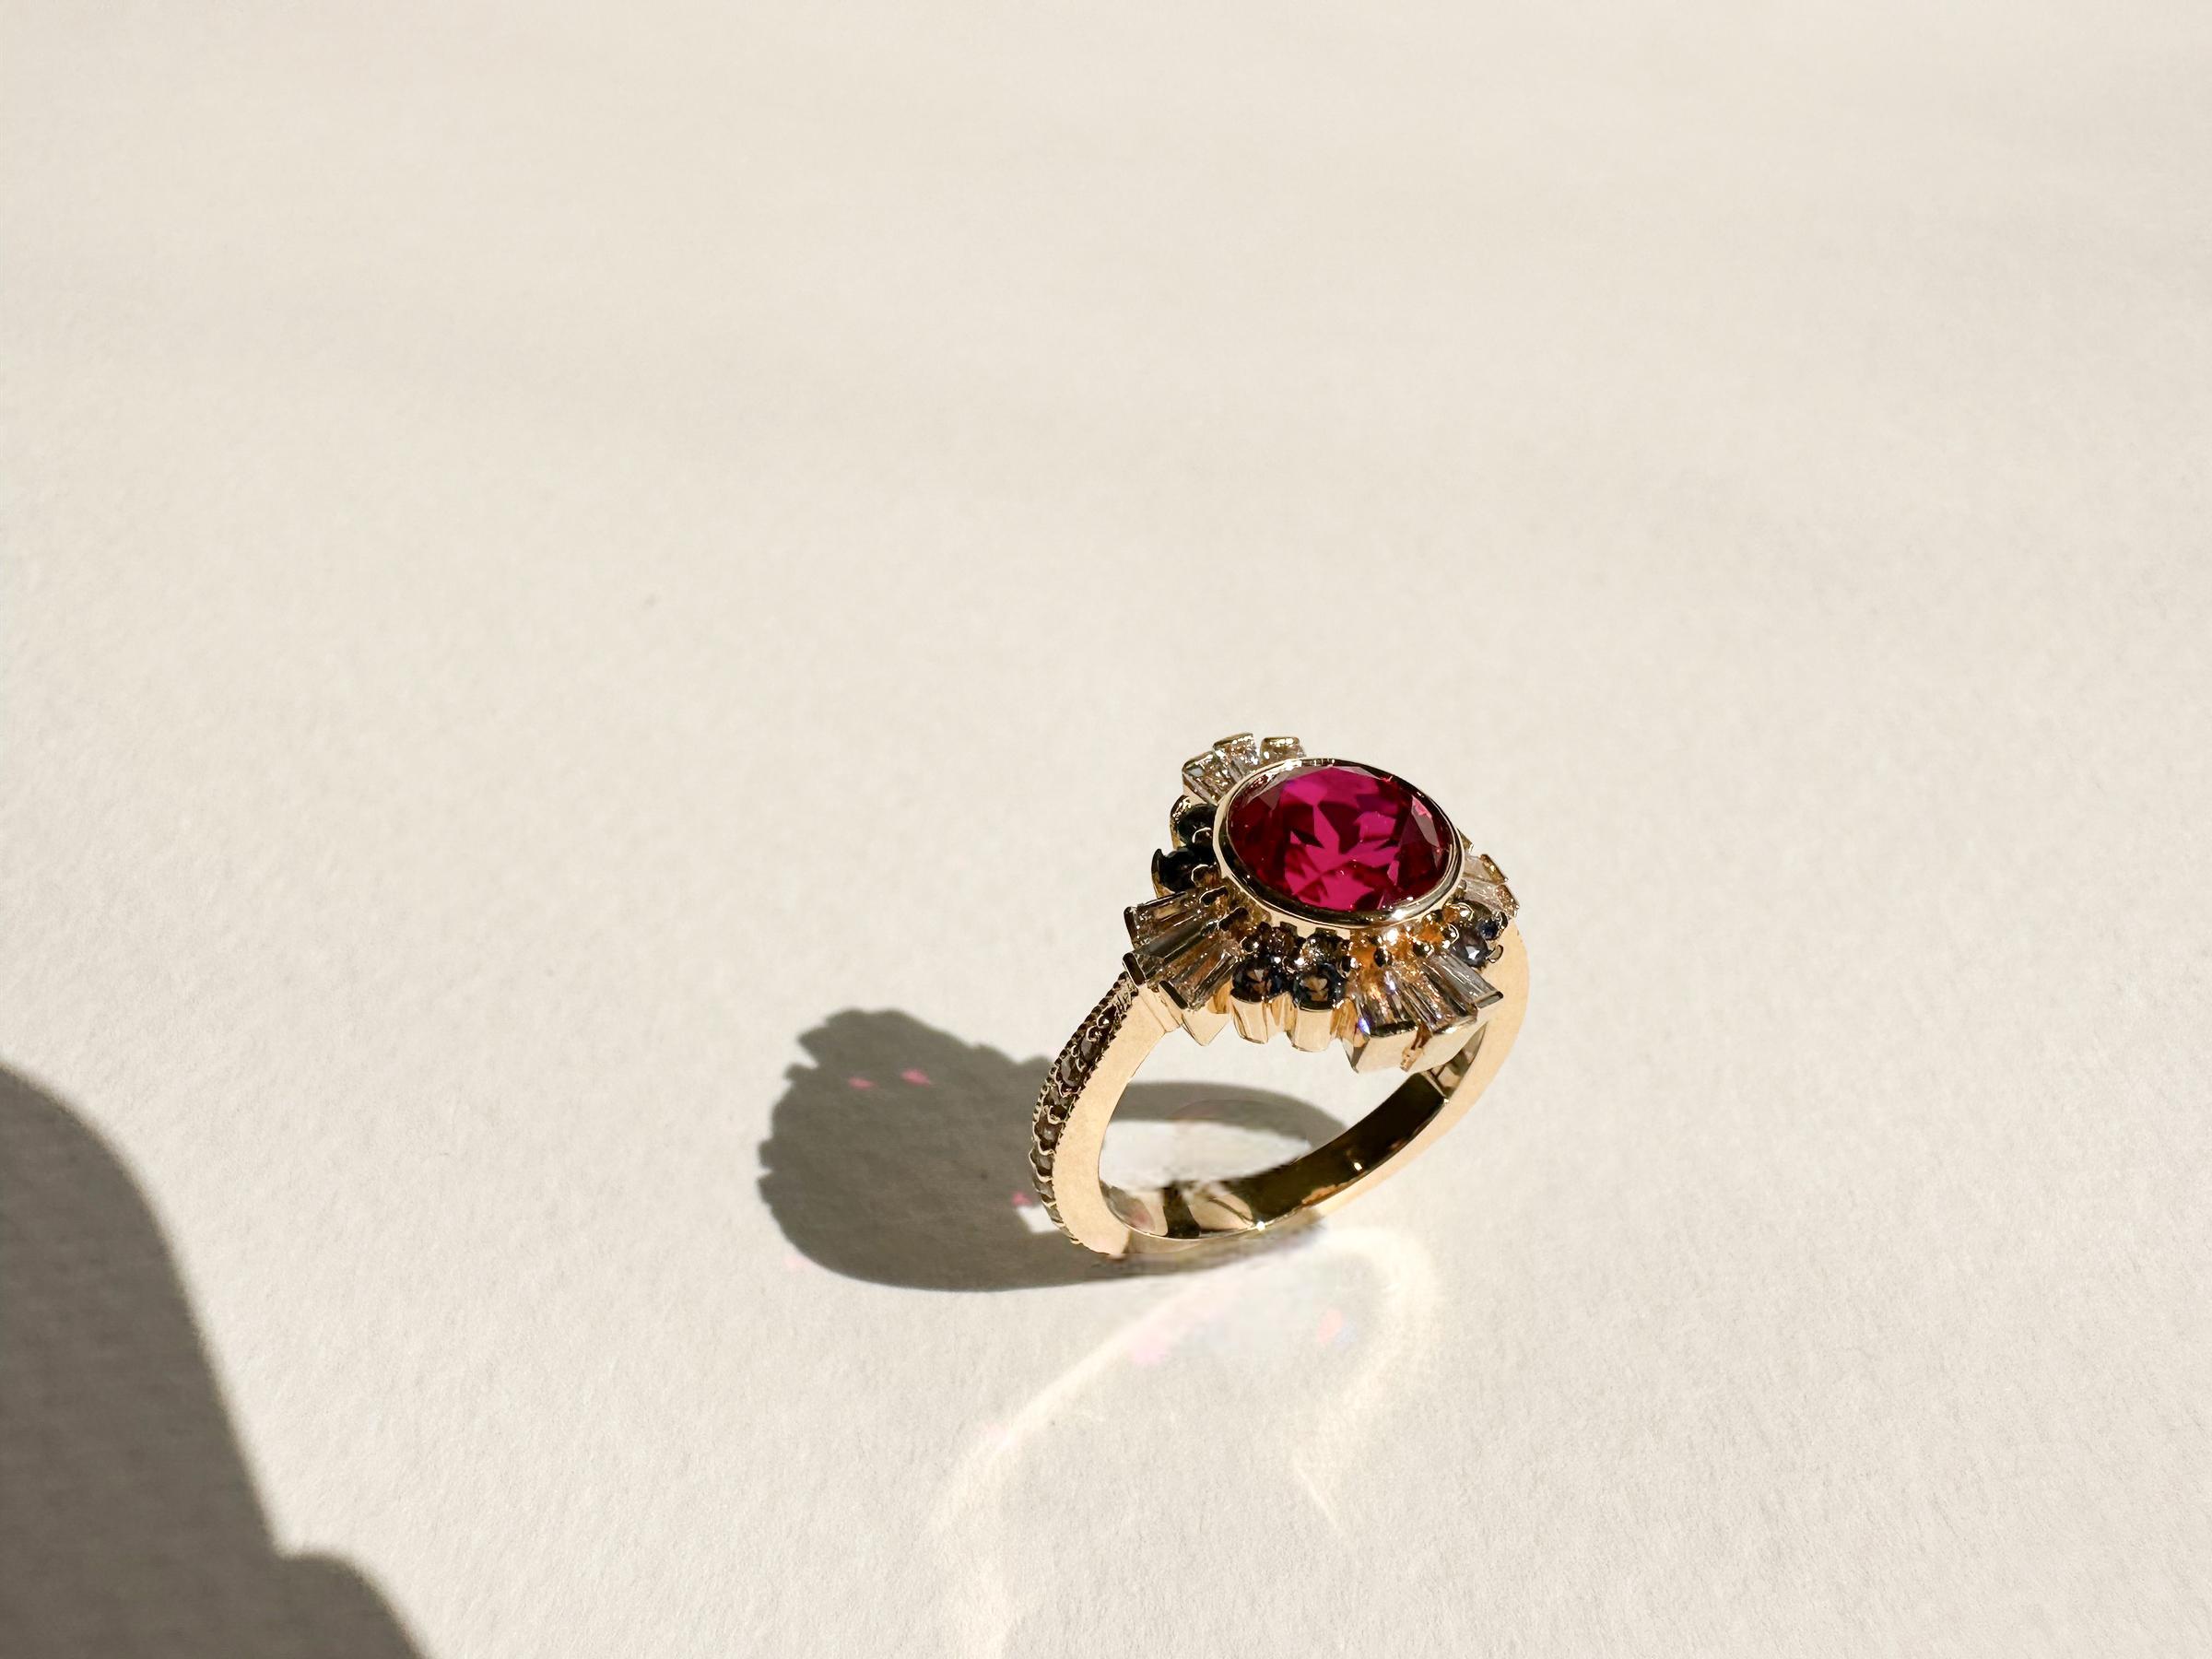 1.5 carat ruby solitaire engagement ring featuring asymmetric halo and channel set diamonds along the band with milgrain in yellow gold.